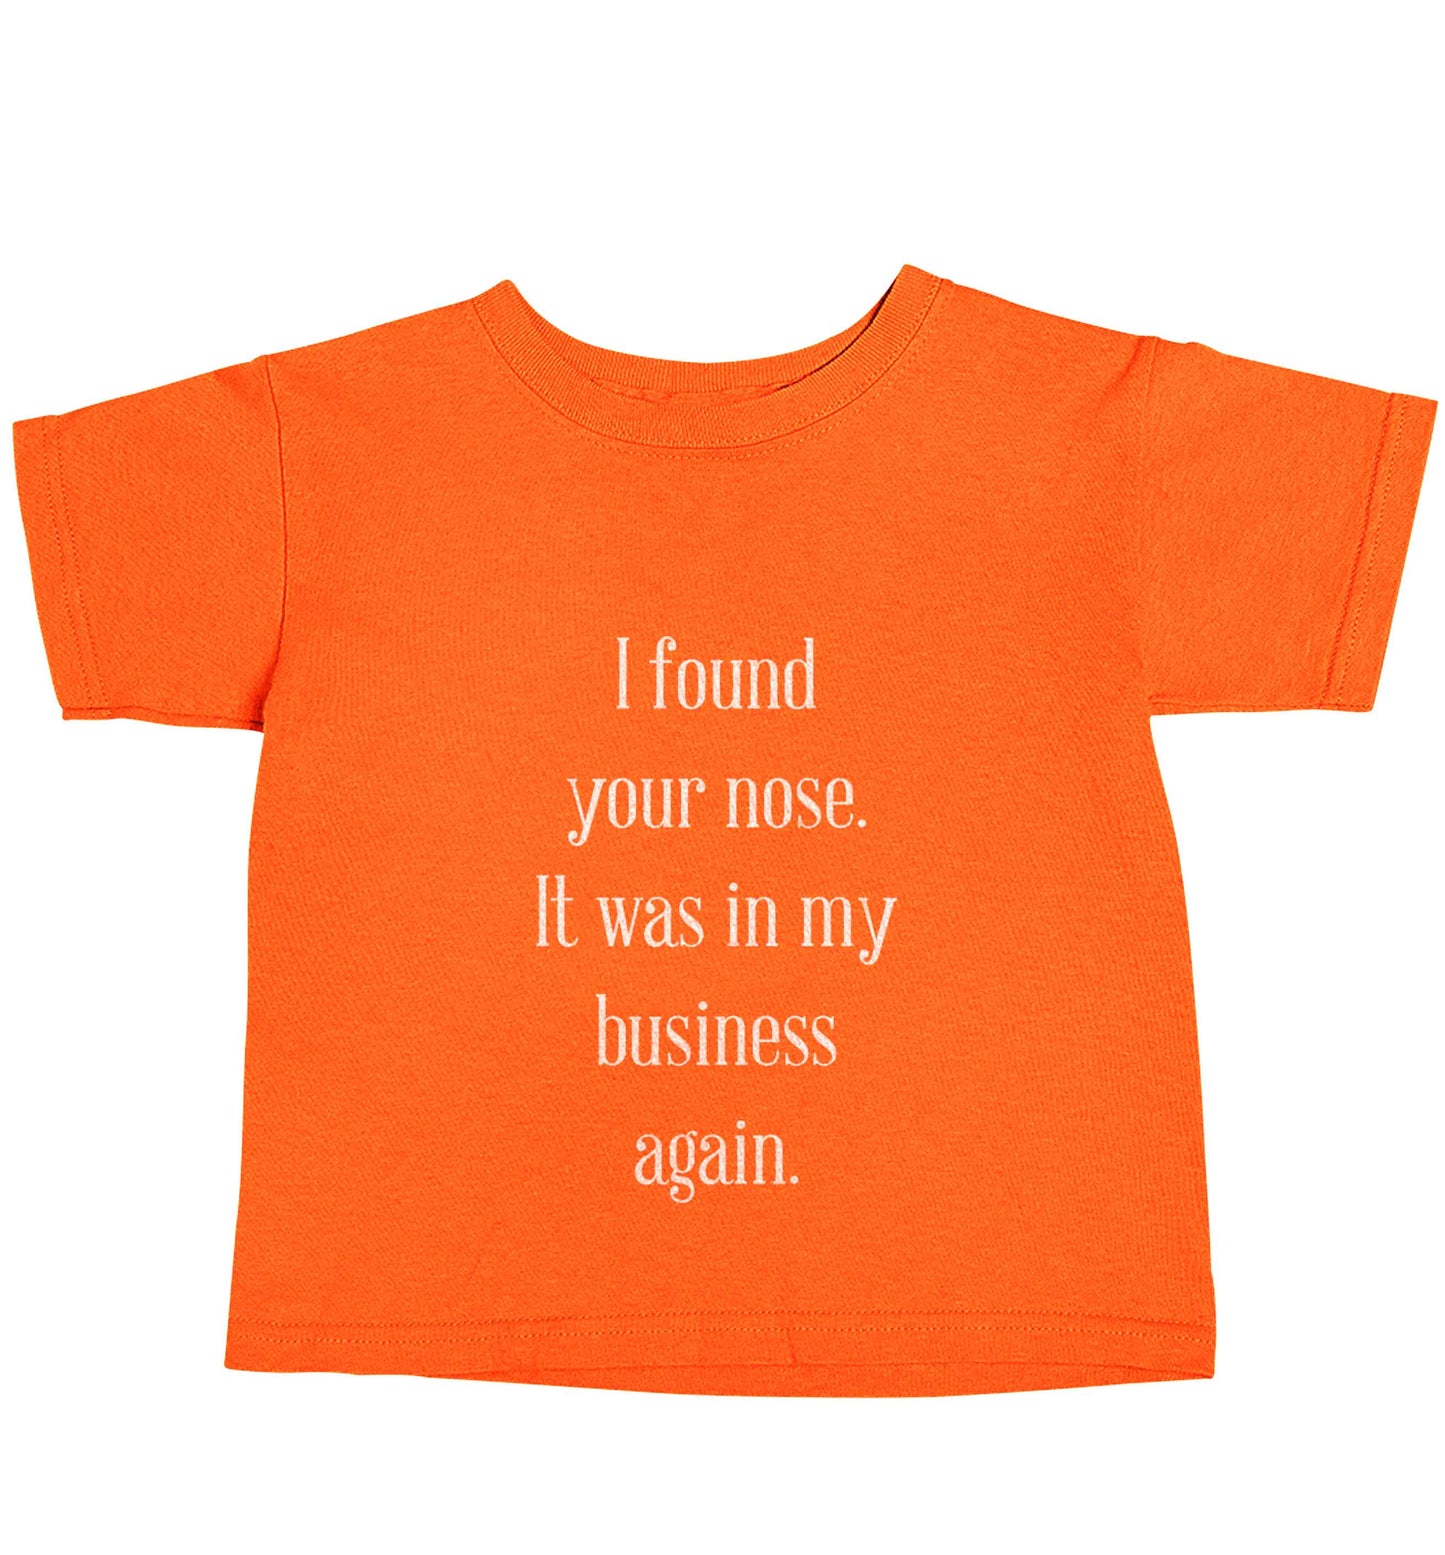 I found your nose it was in my business again orange baby toddler Tshirt 2 Years